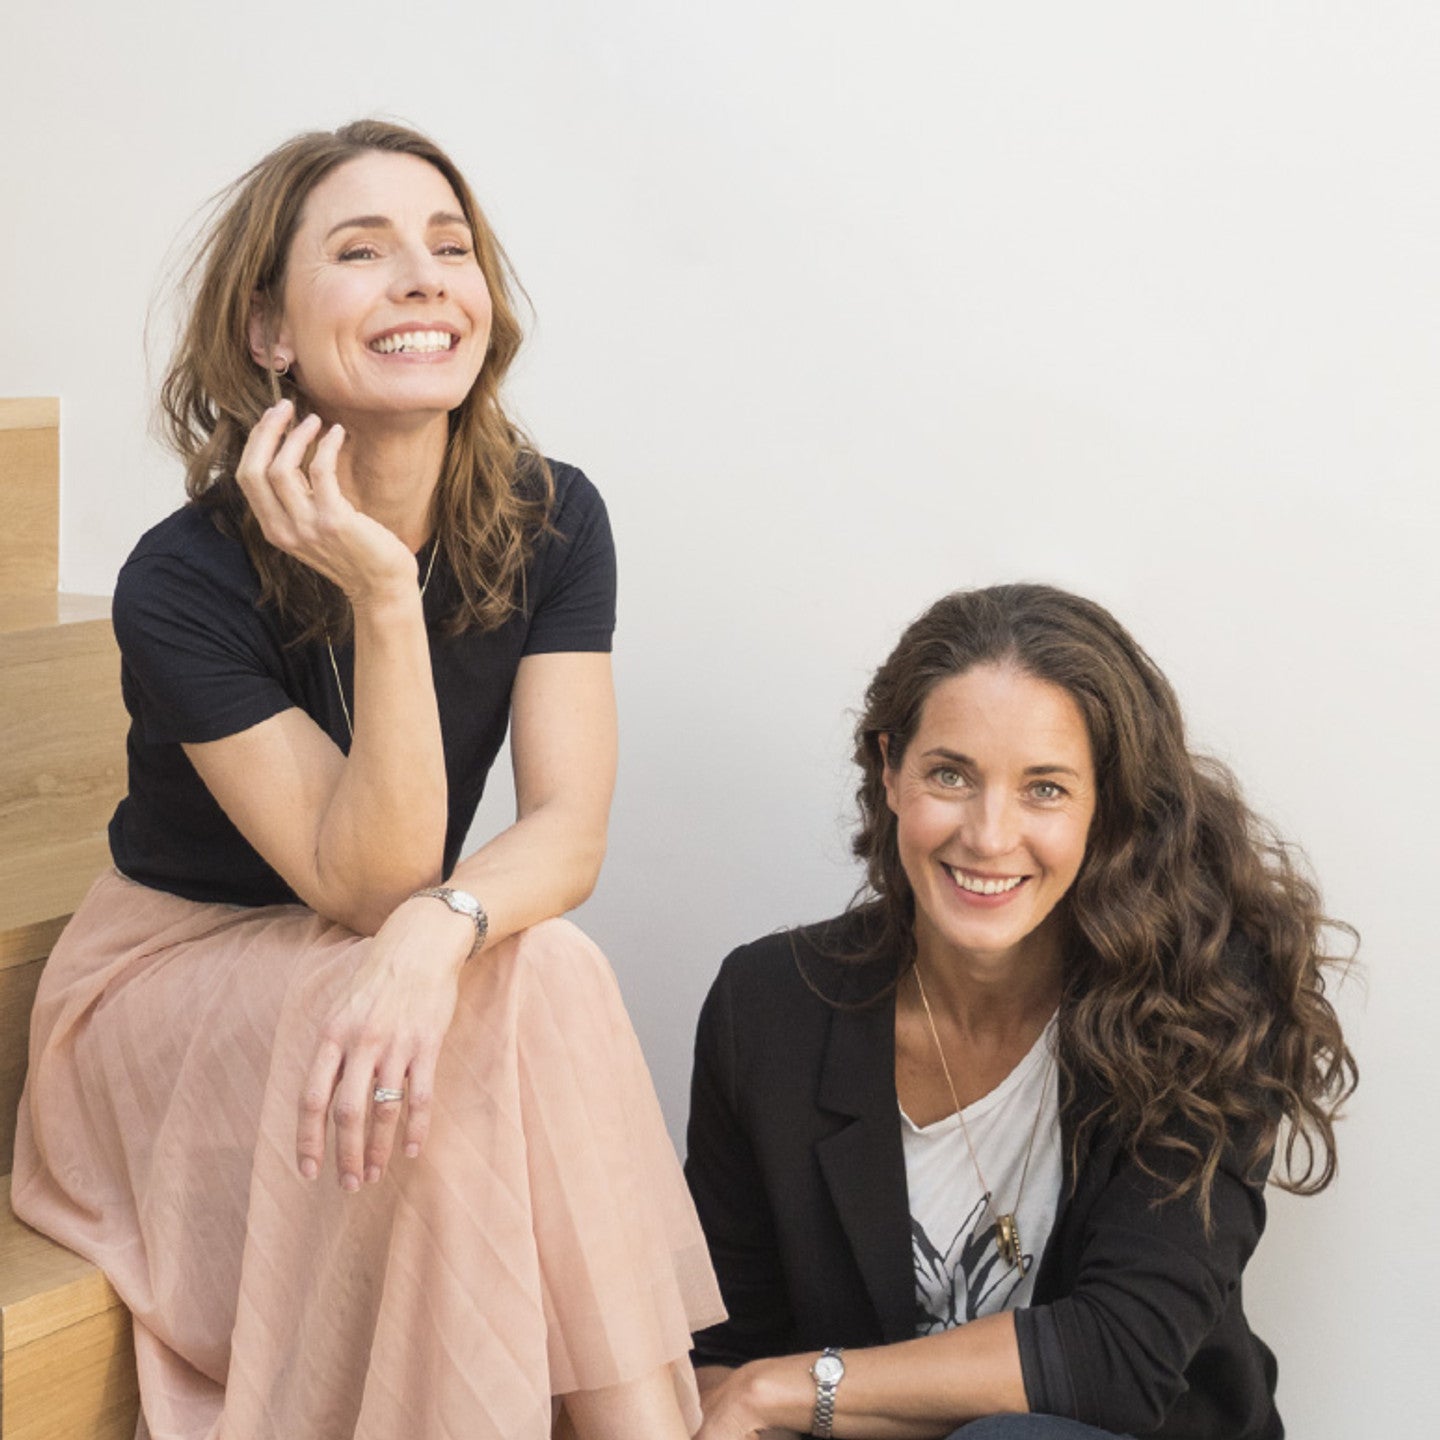 Rebecca and Clare's tips for starting a business